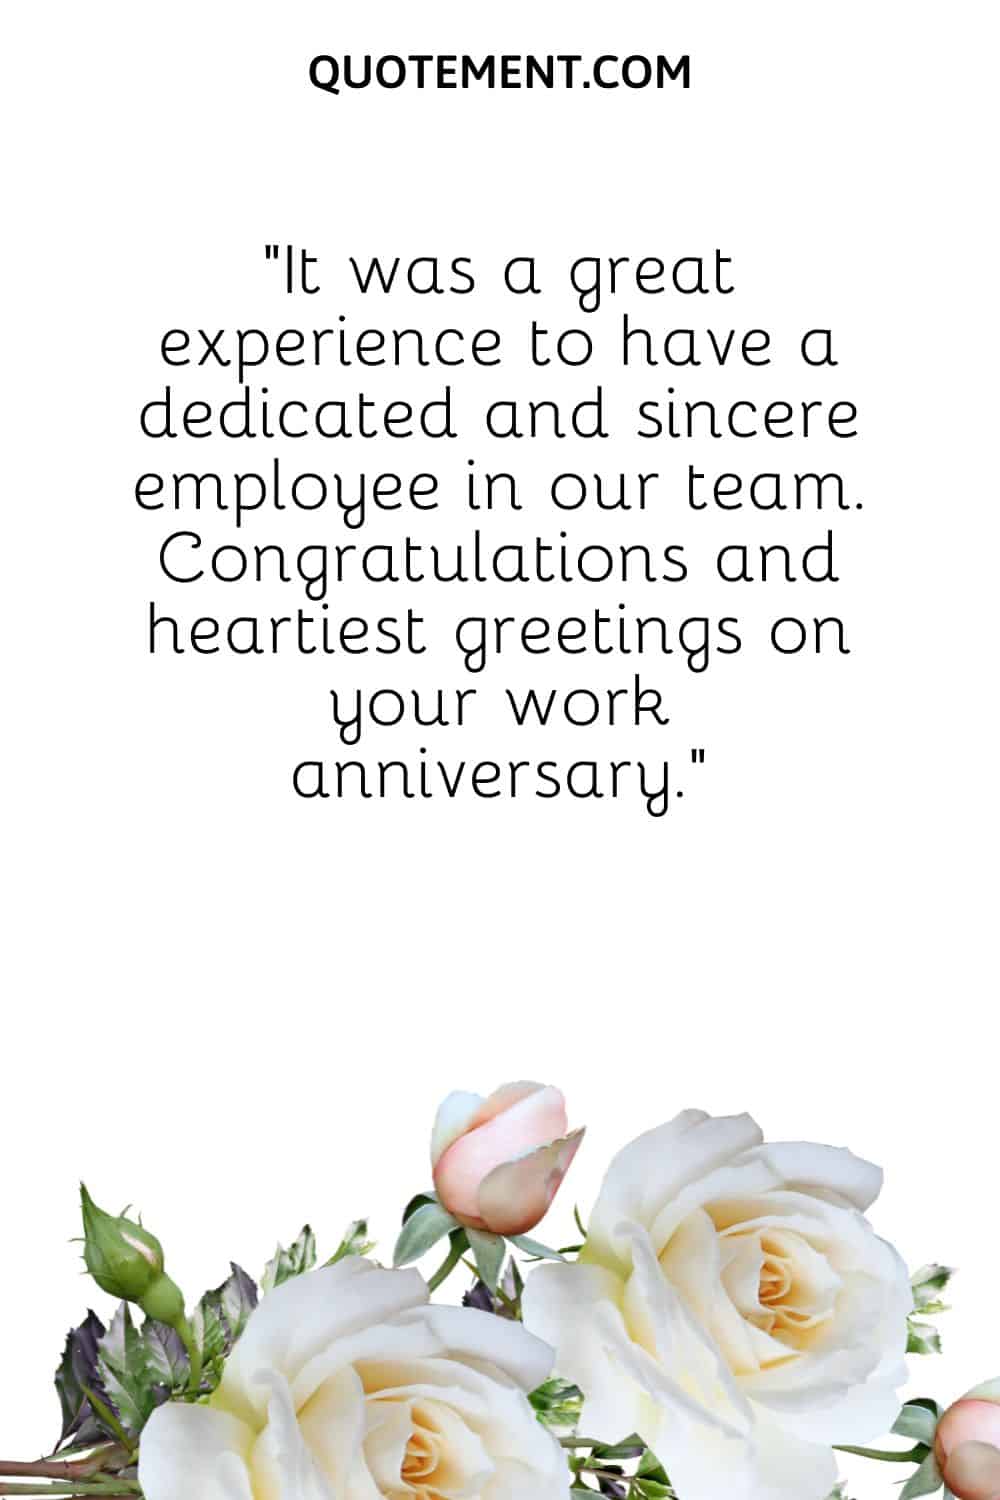 “It was a great experience to have a dedicated and sincere employee in our team. Congratulations and heartiest greetings on your work anniversary.”